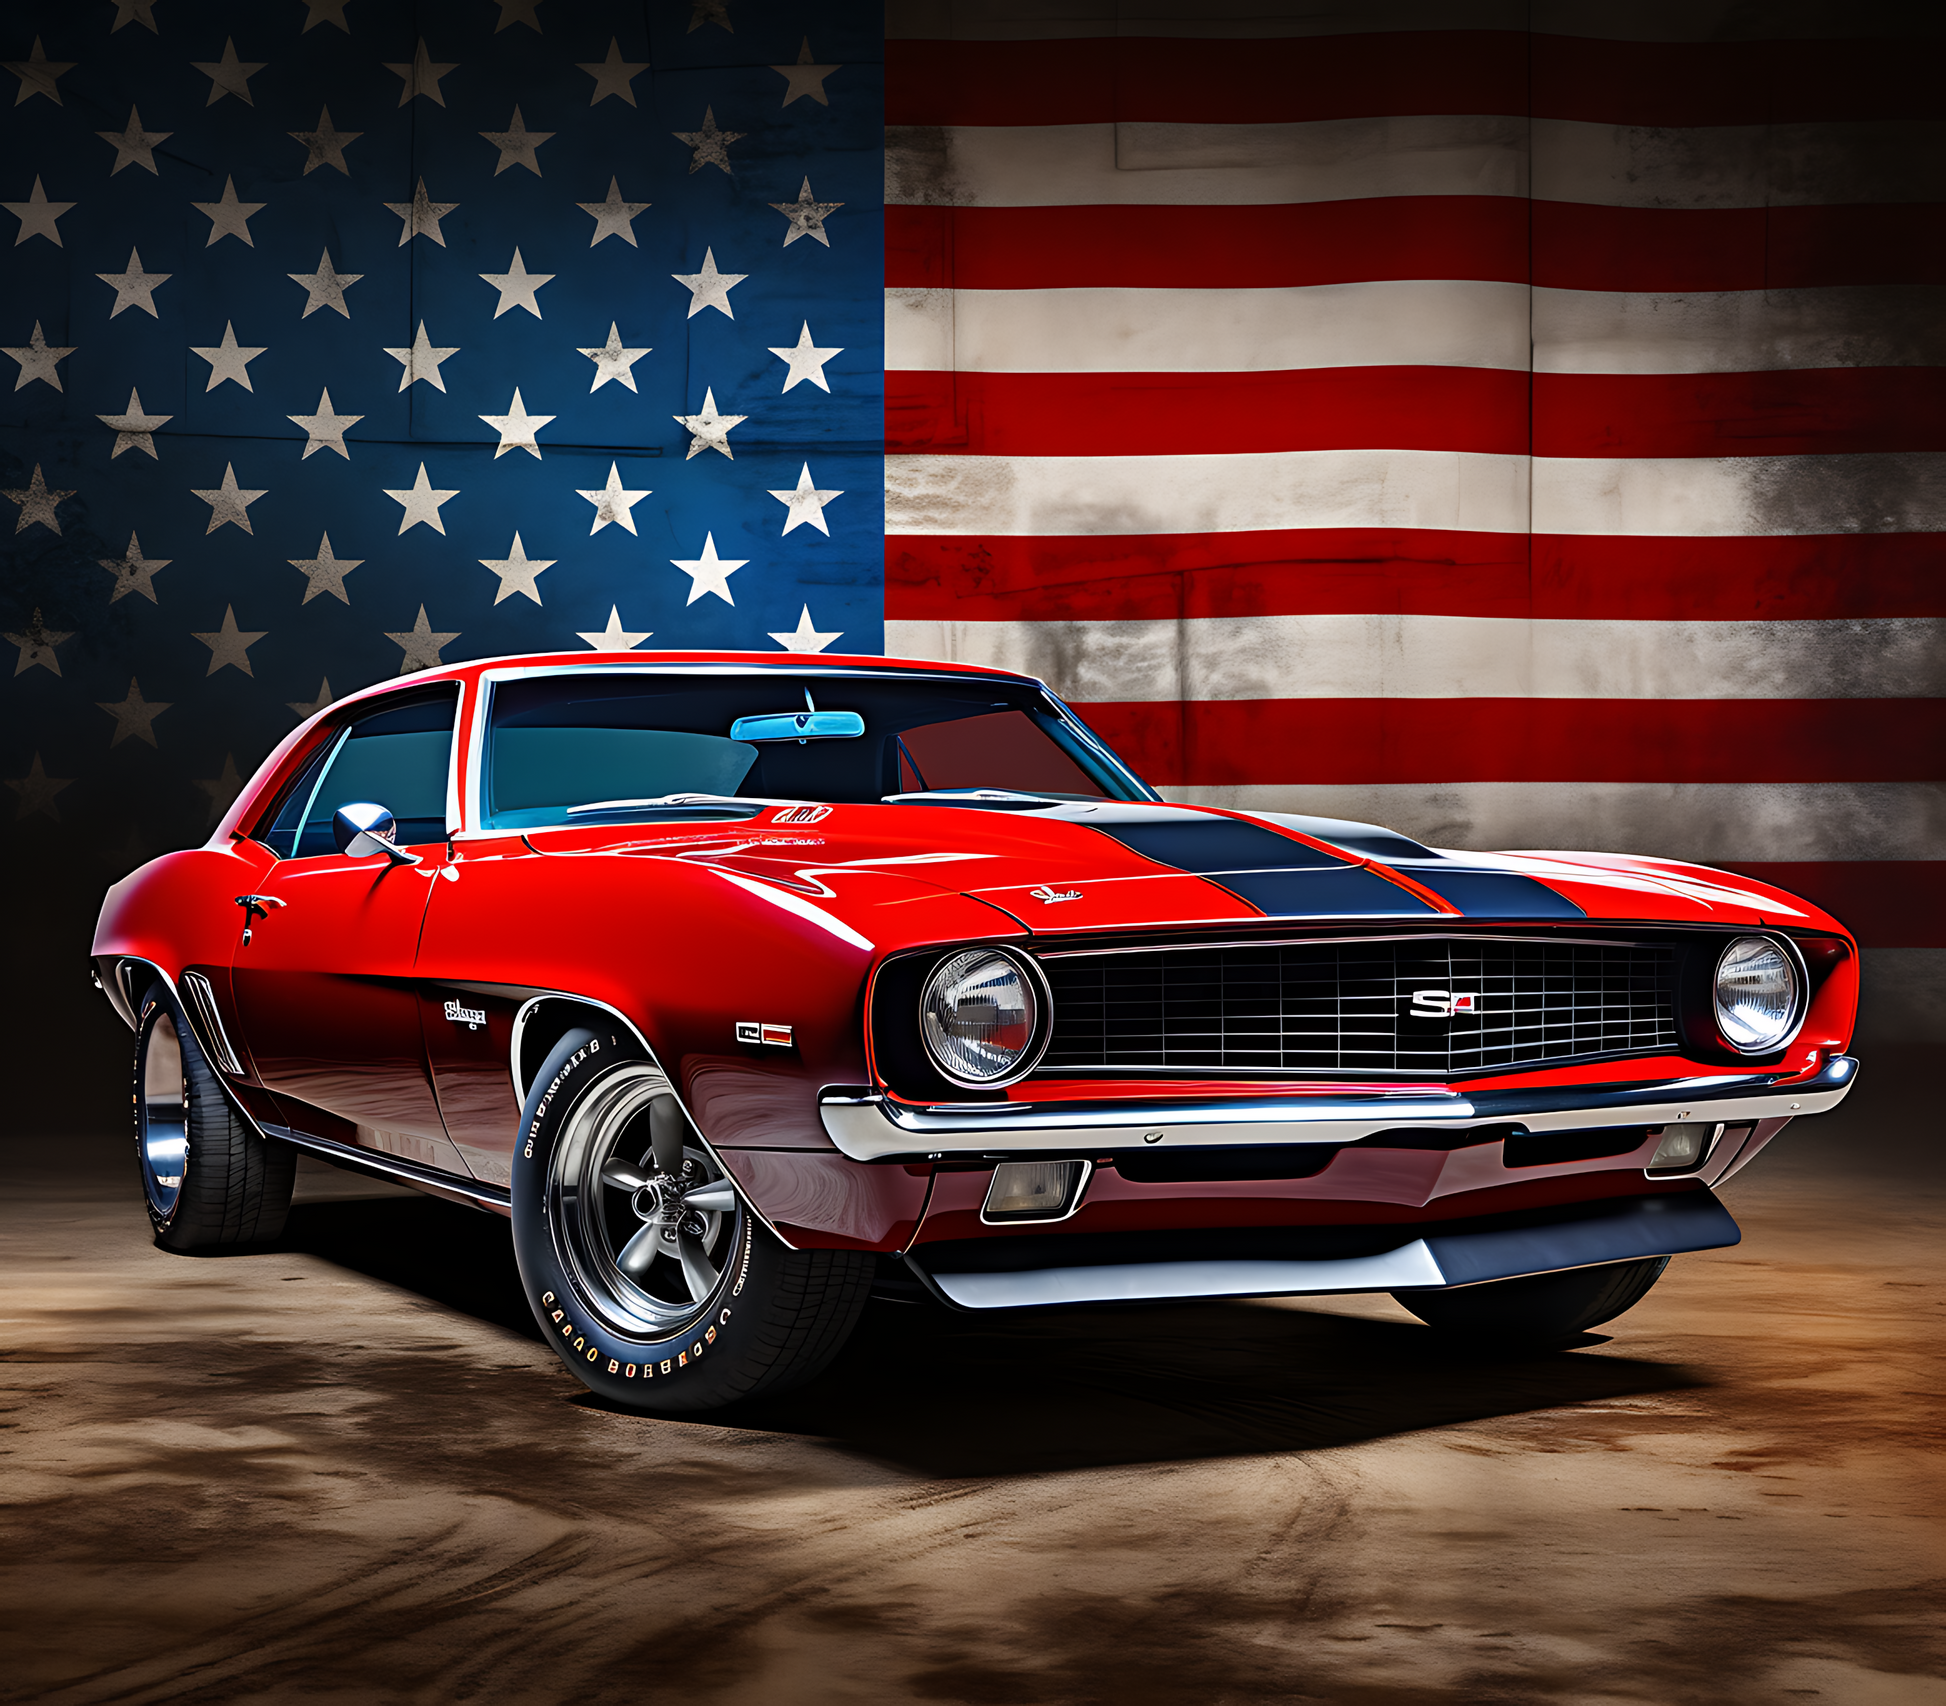 Muscle cars ruled the roads and this tumbler pays homage to the Chevy Camaro in classic red and the 2 black stripes down the hood with the American Flag in the background.